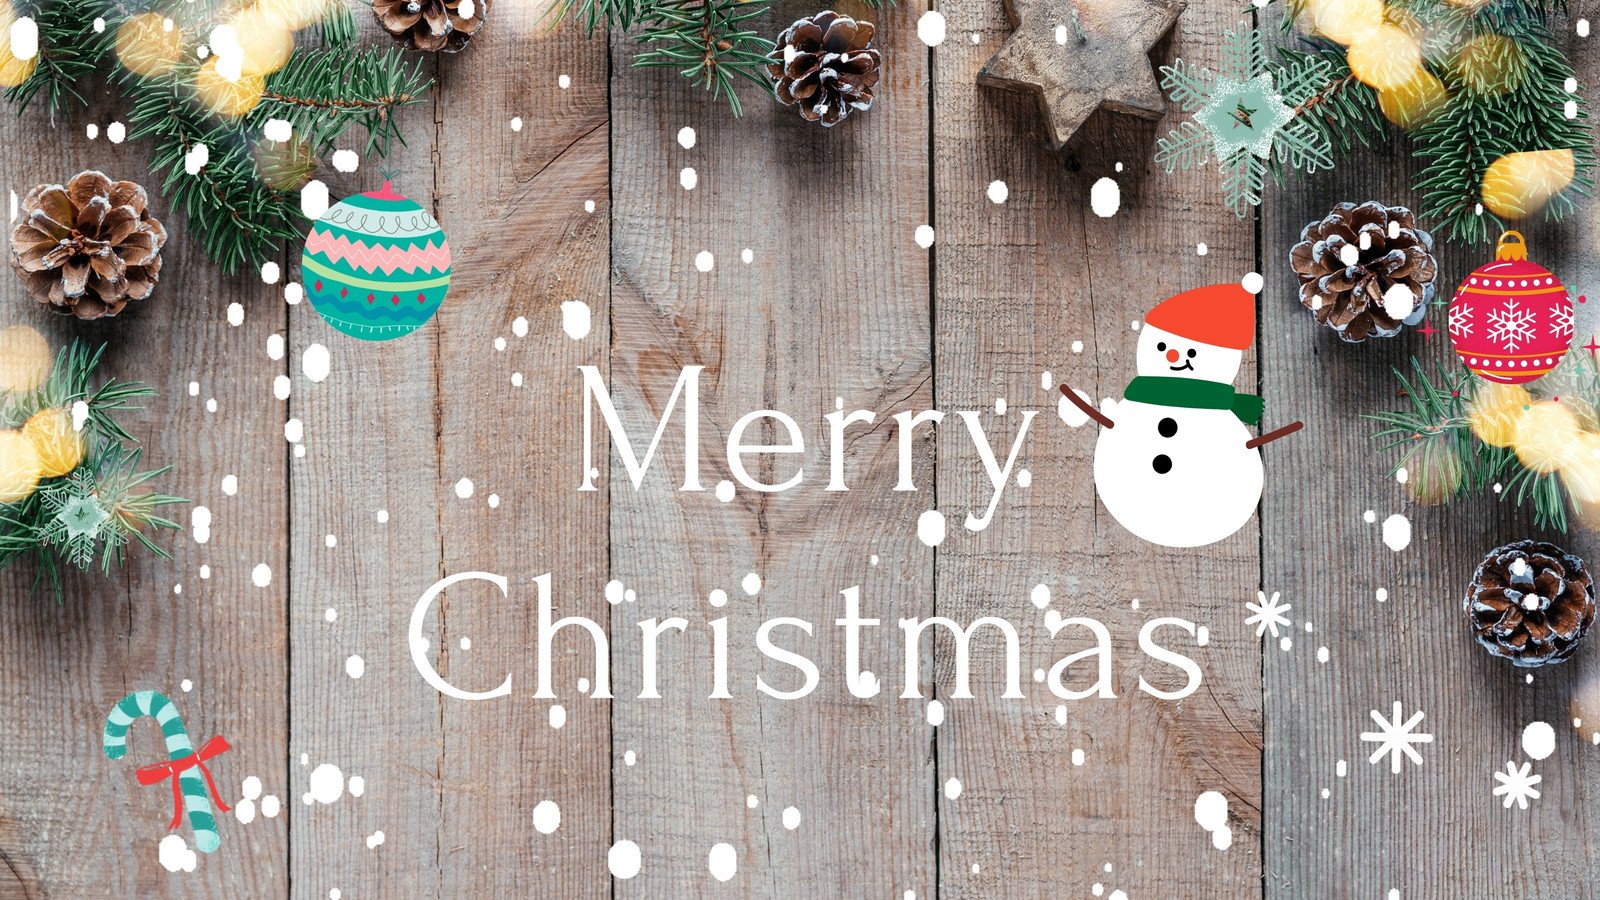 Free Christmas video templates to customize | Canva